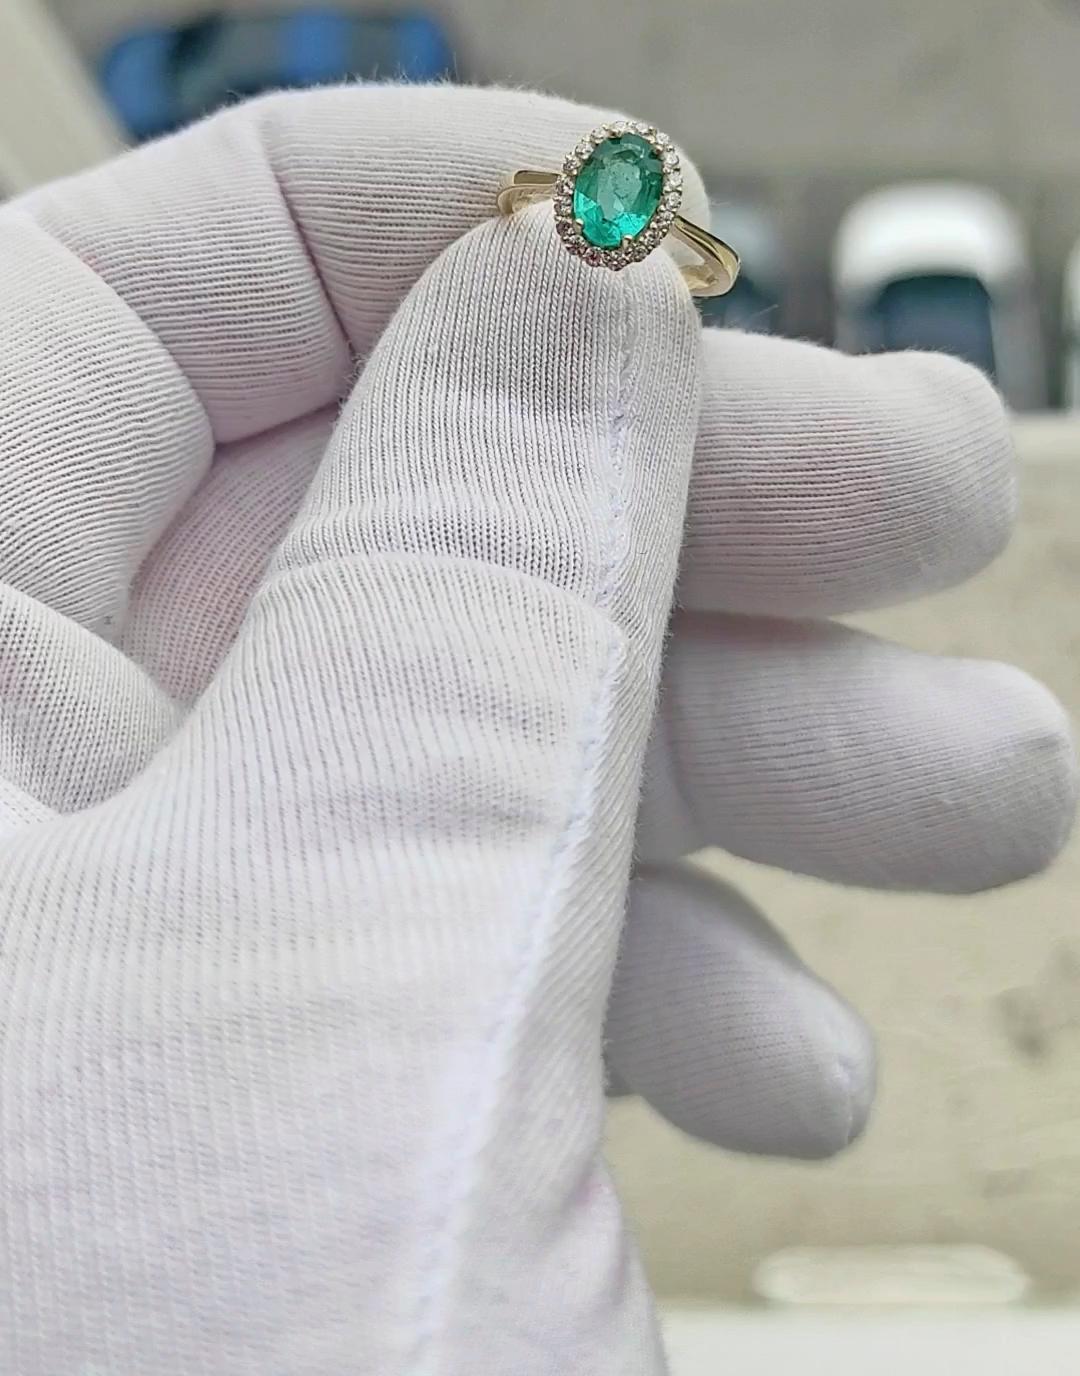 For Sale:  Emerald 14k gold ring . 6